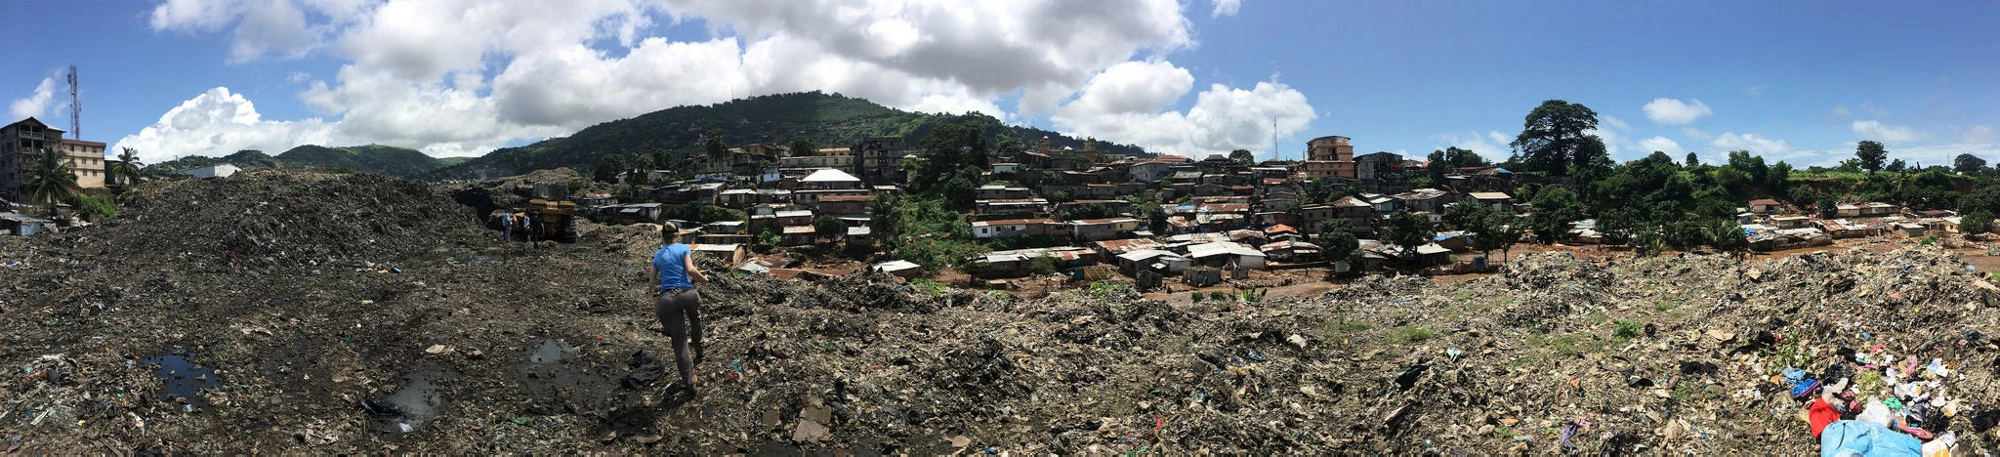 2017 damage and loss assessment following landslides and floods in Sierra Leone. Photo: World Bank